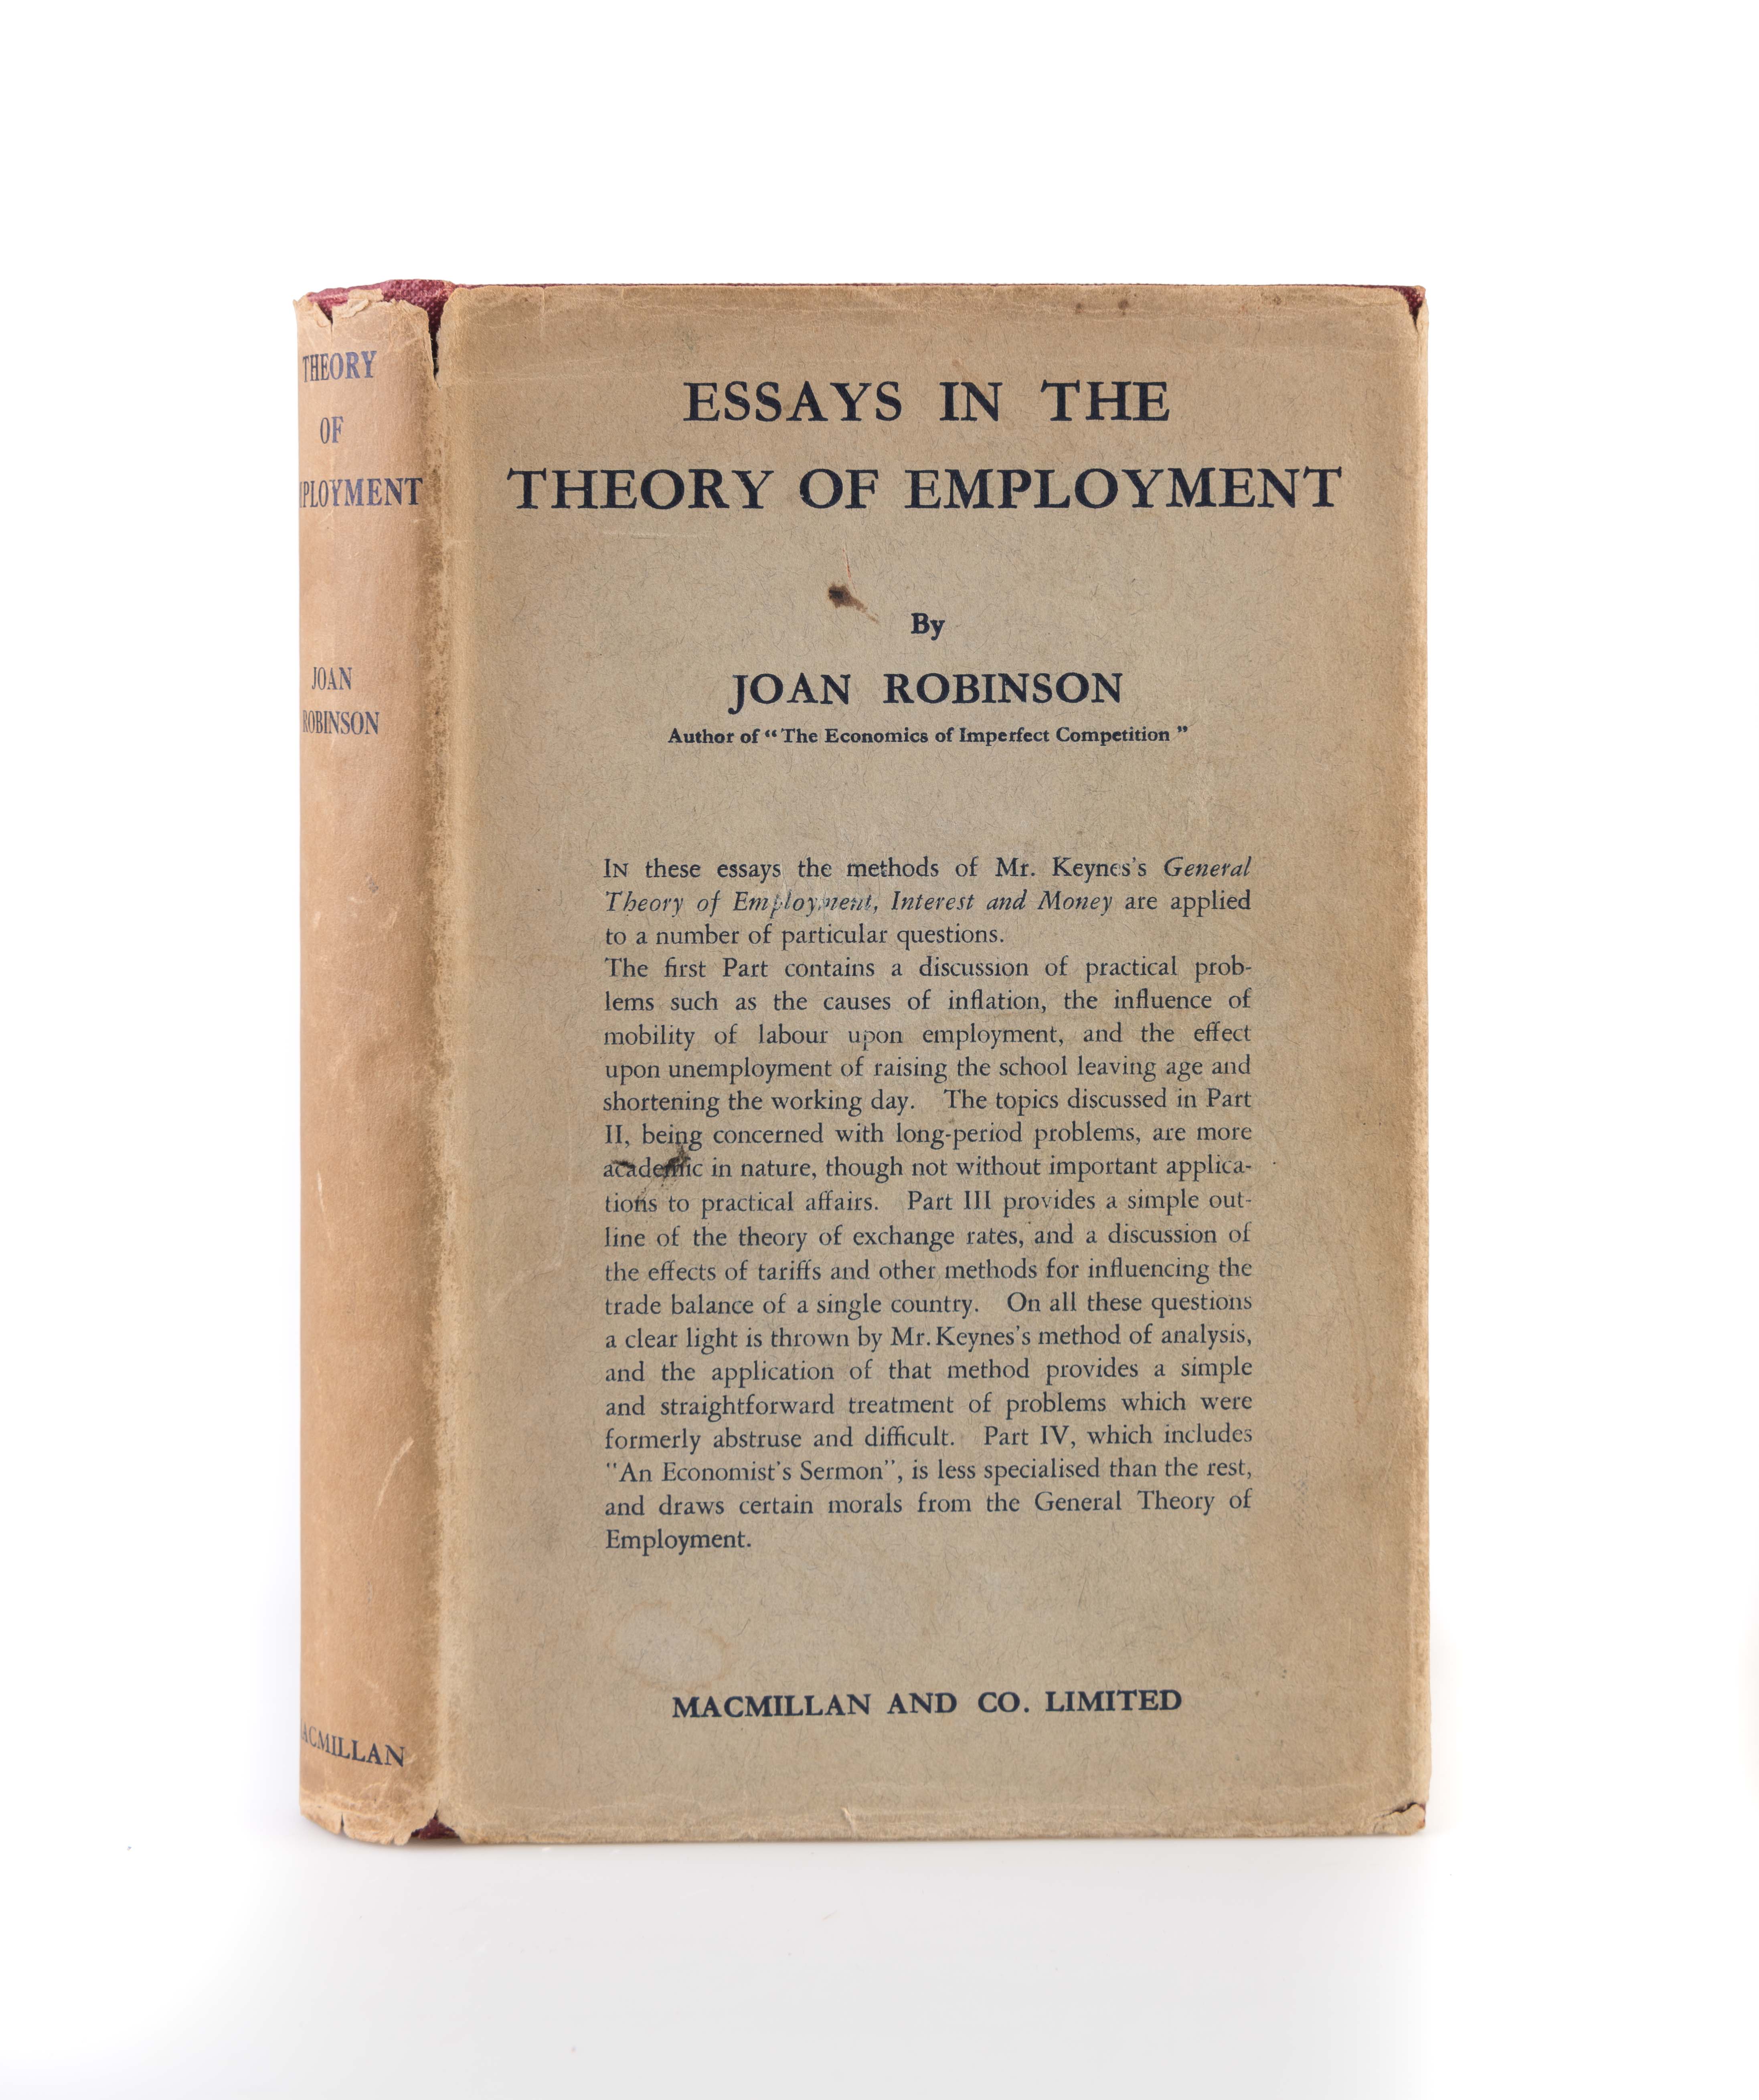 ESSAYS IN THE THEORY OF EMPLOYMENT No173